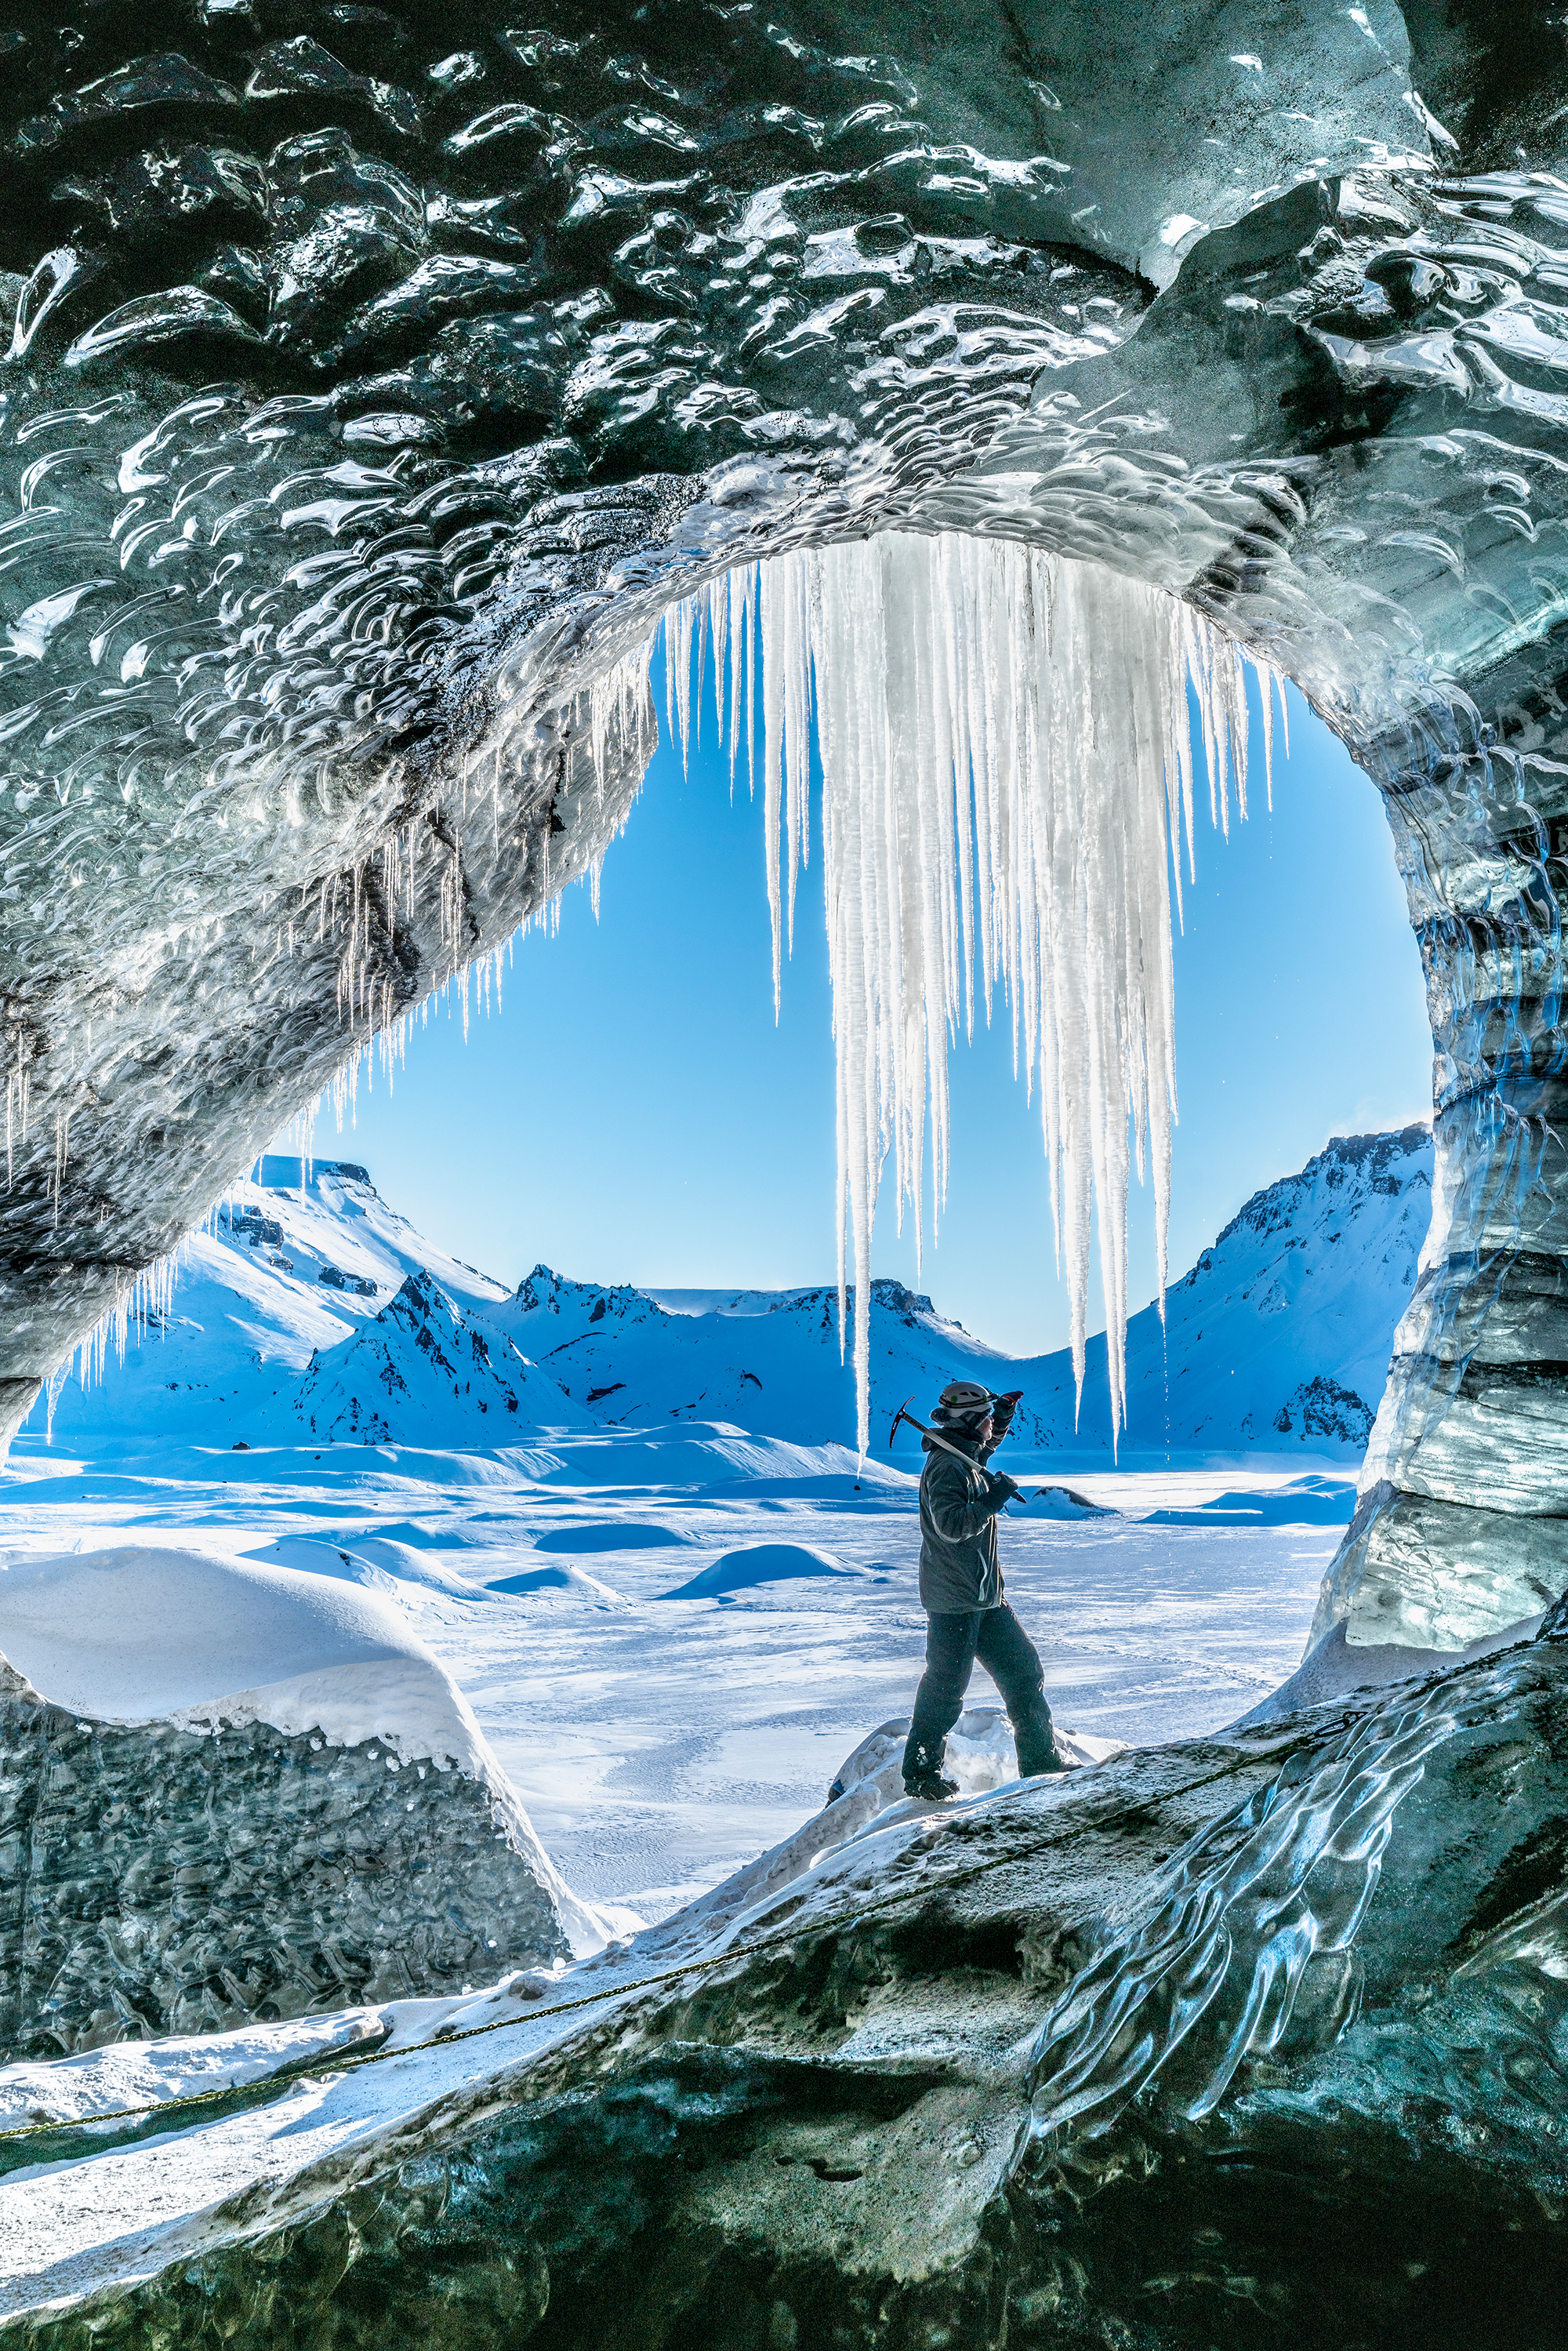 The Katla ice caves are open outside the usual ice caving months in Iceland.